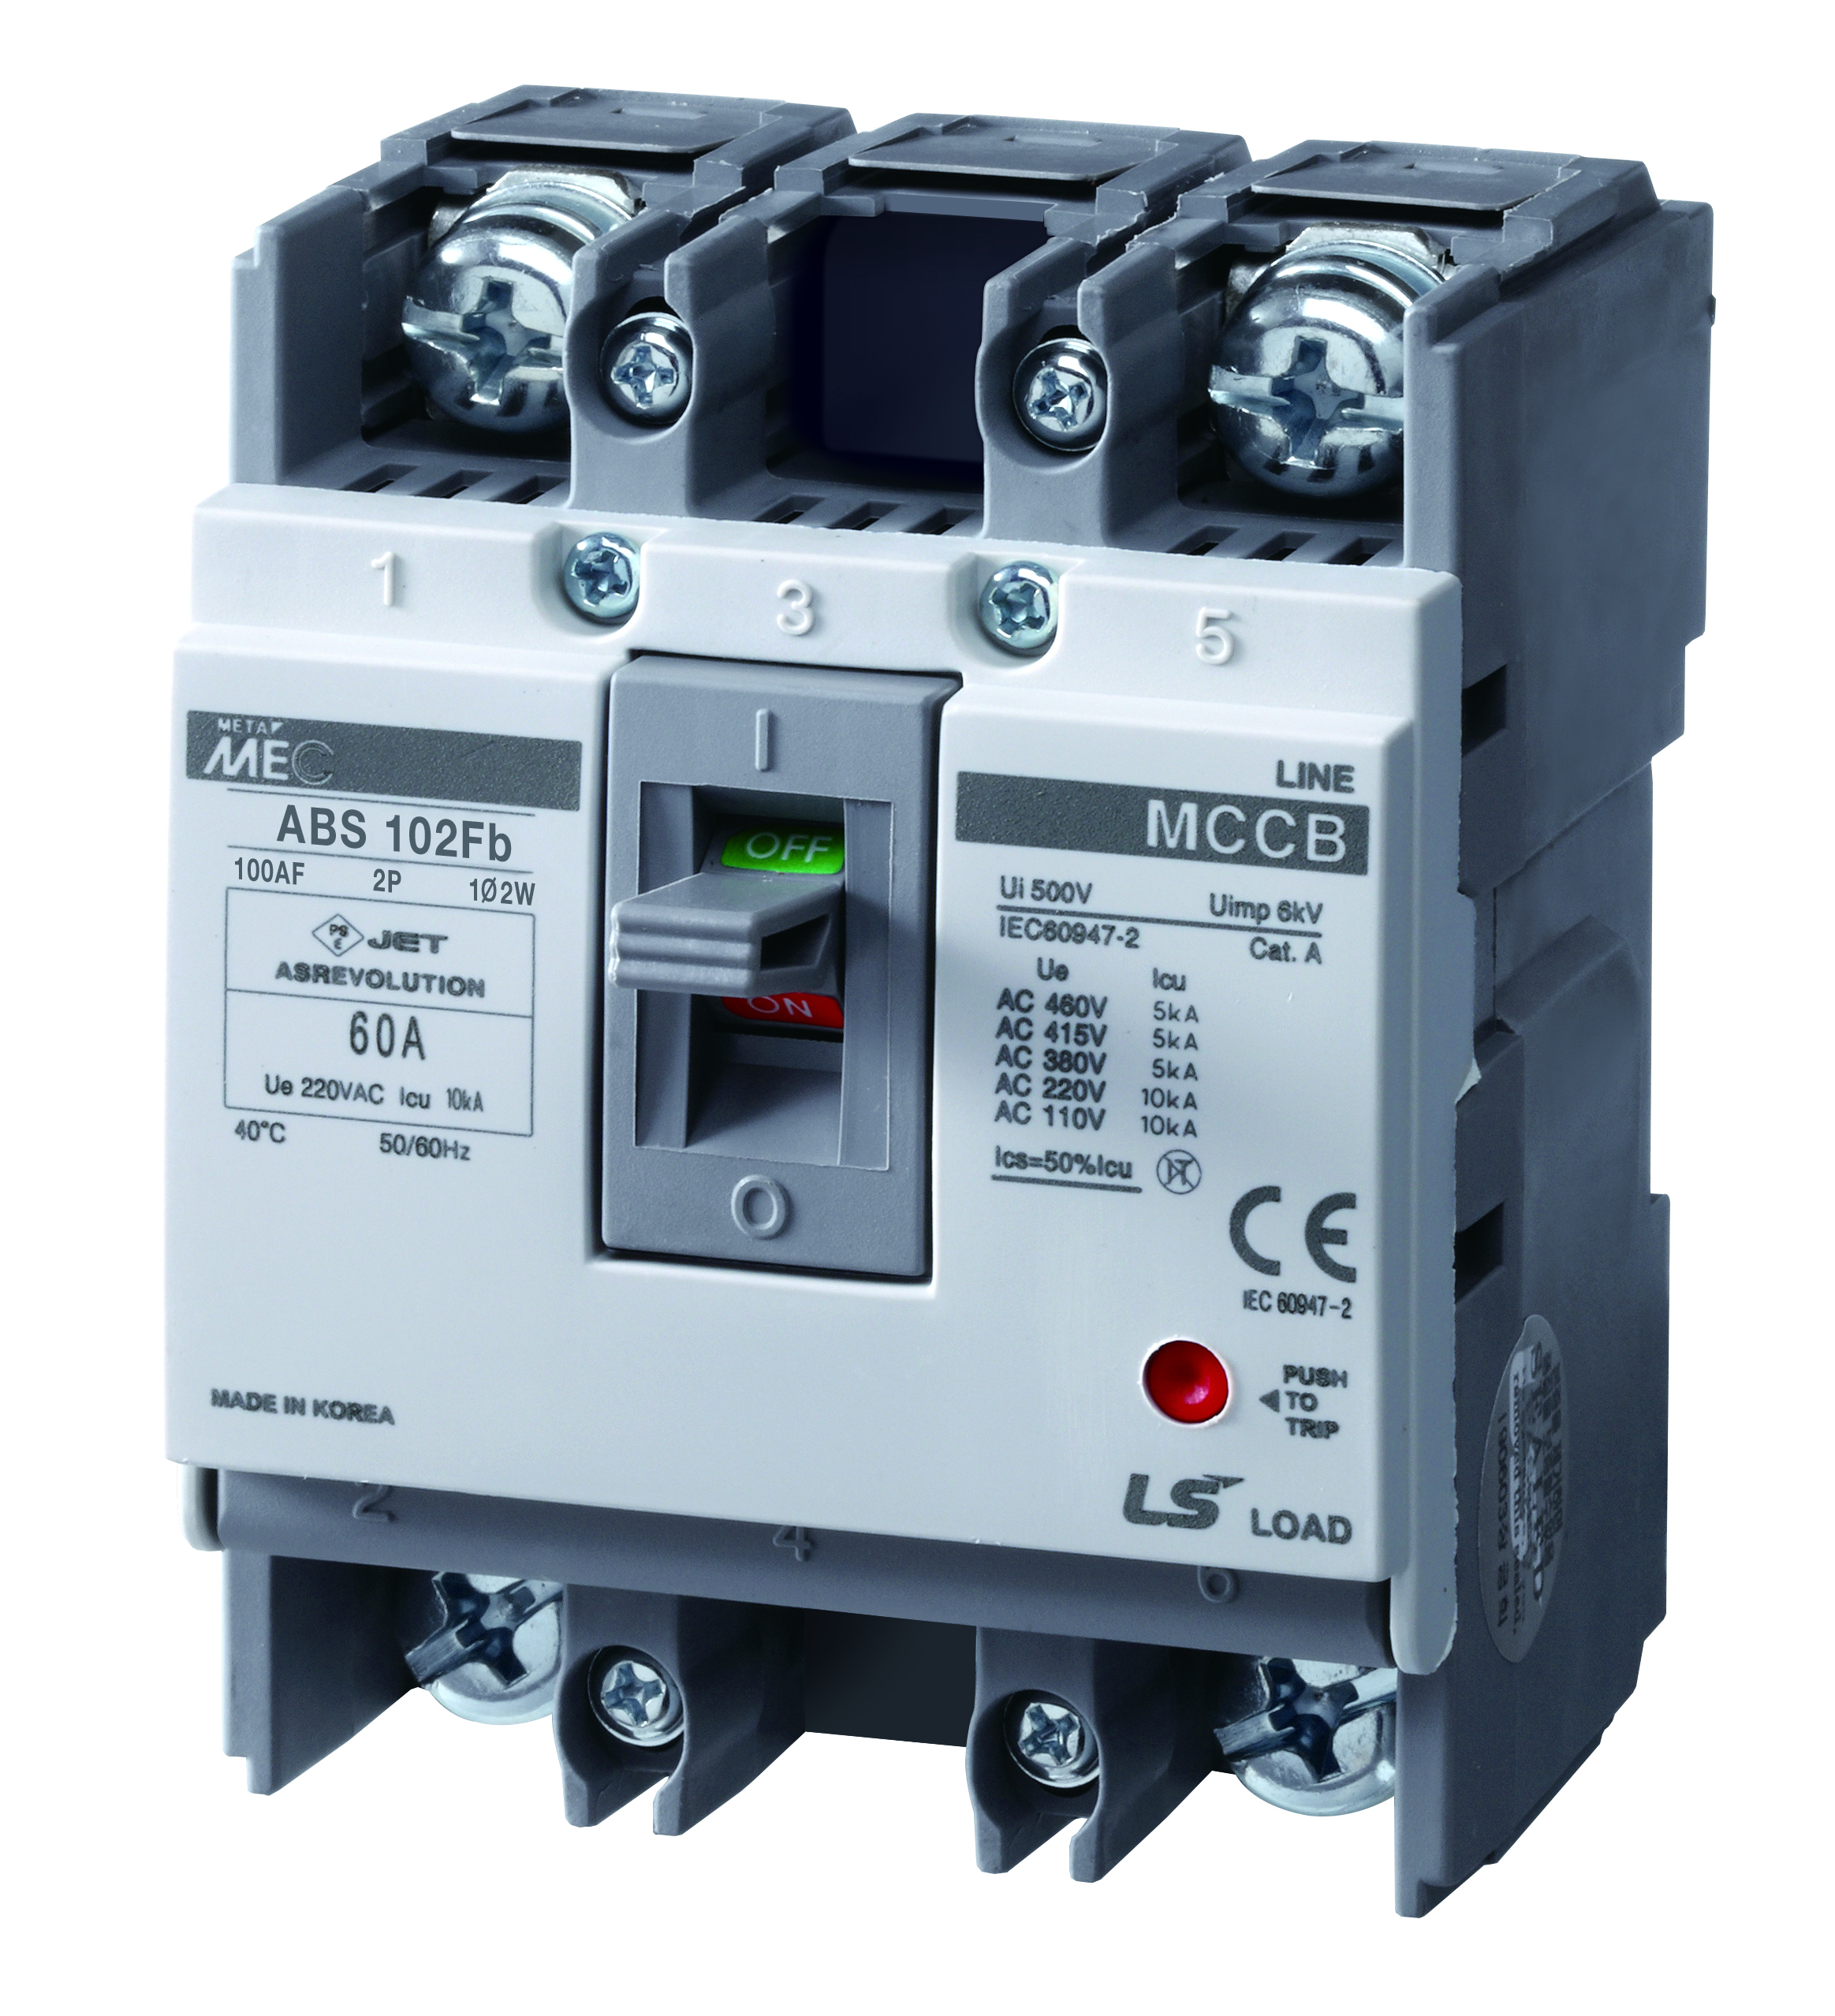 Molded Case Circuit Breakers - Fuseless, ABS Series, DIN Rail Mounting ABS32FB-10A